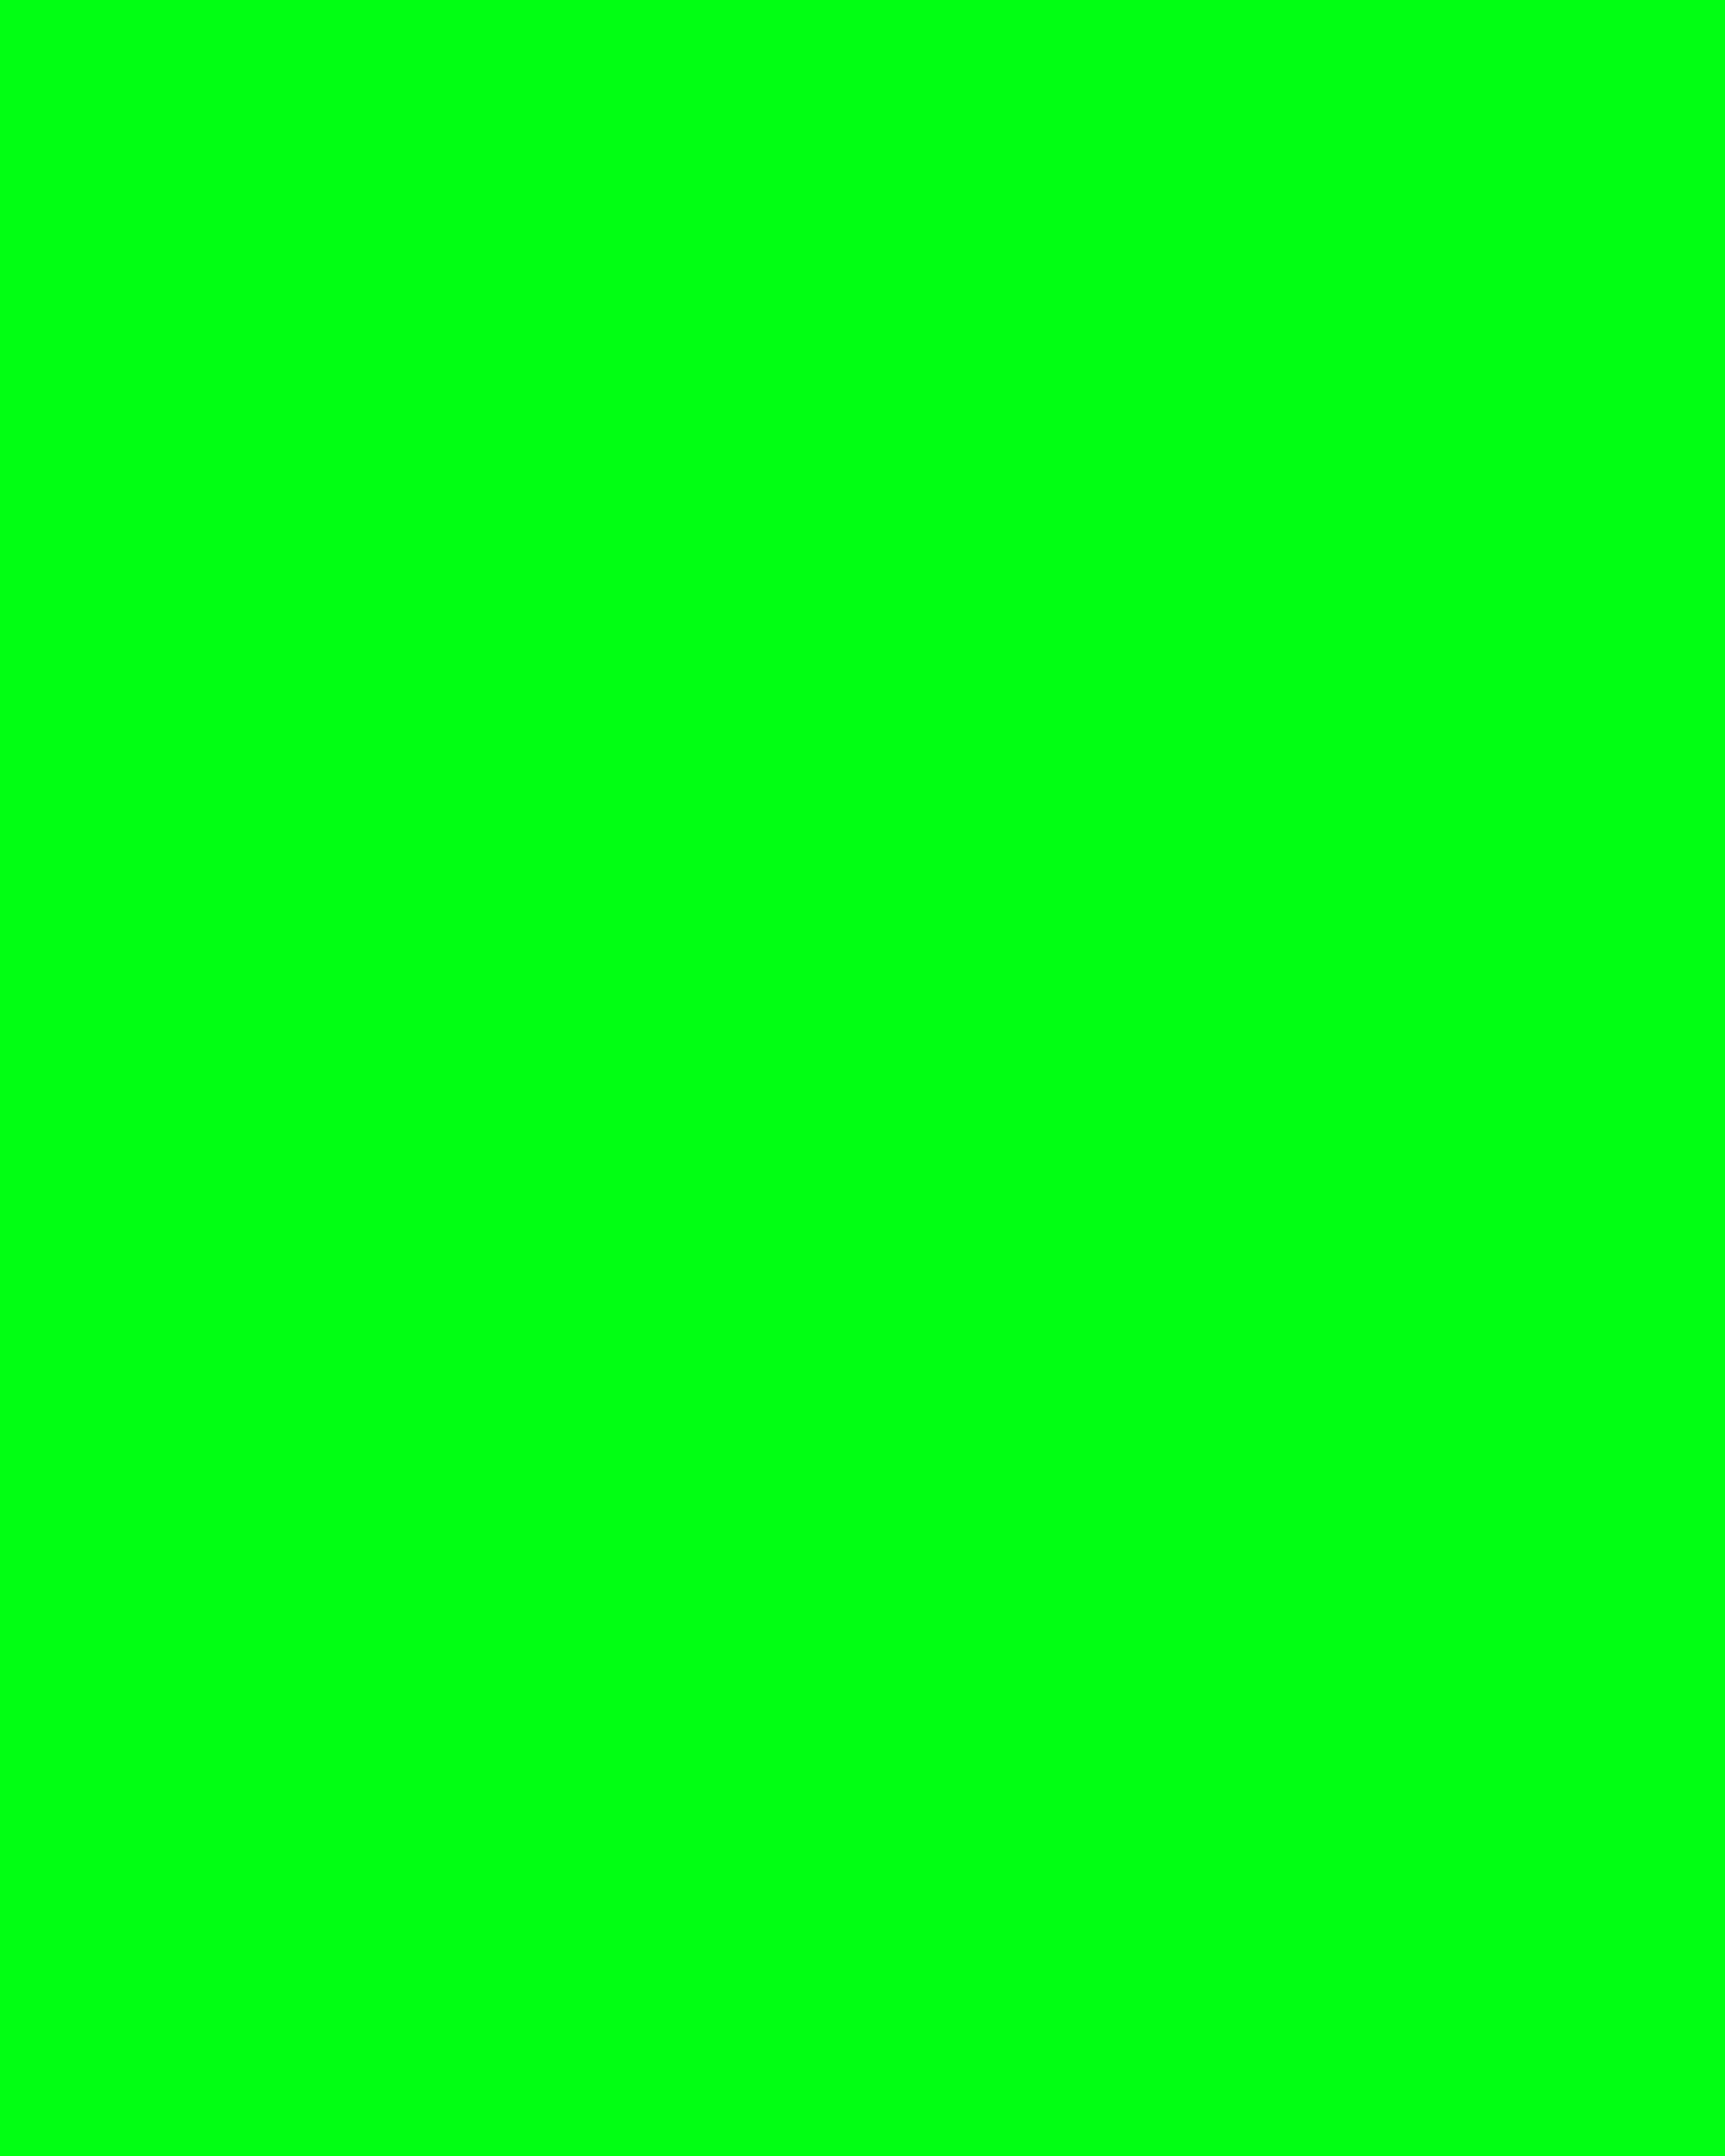 Perfect How To Make A Green Screen Background in Bedroom